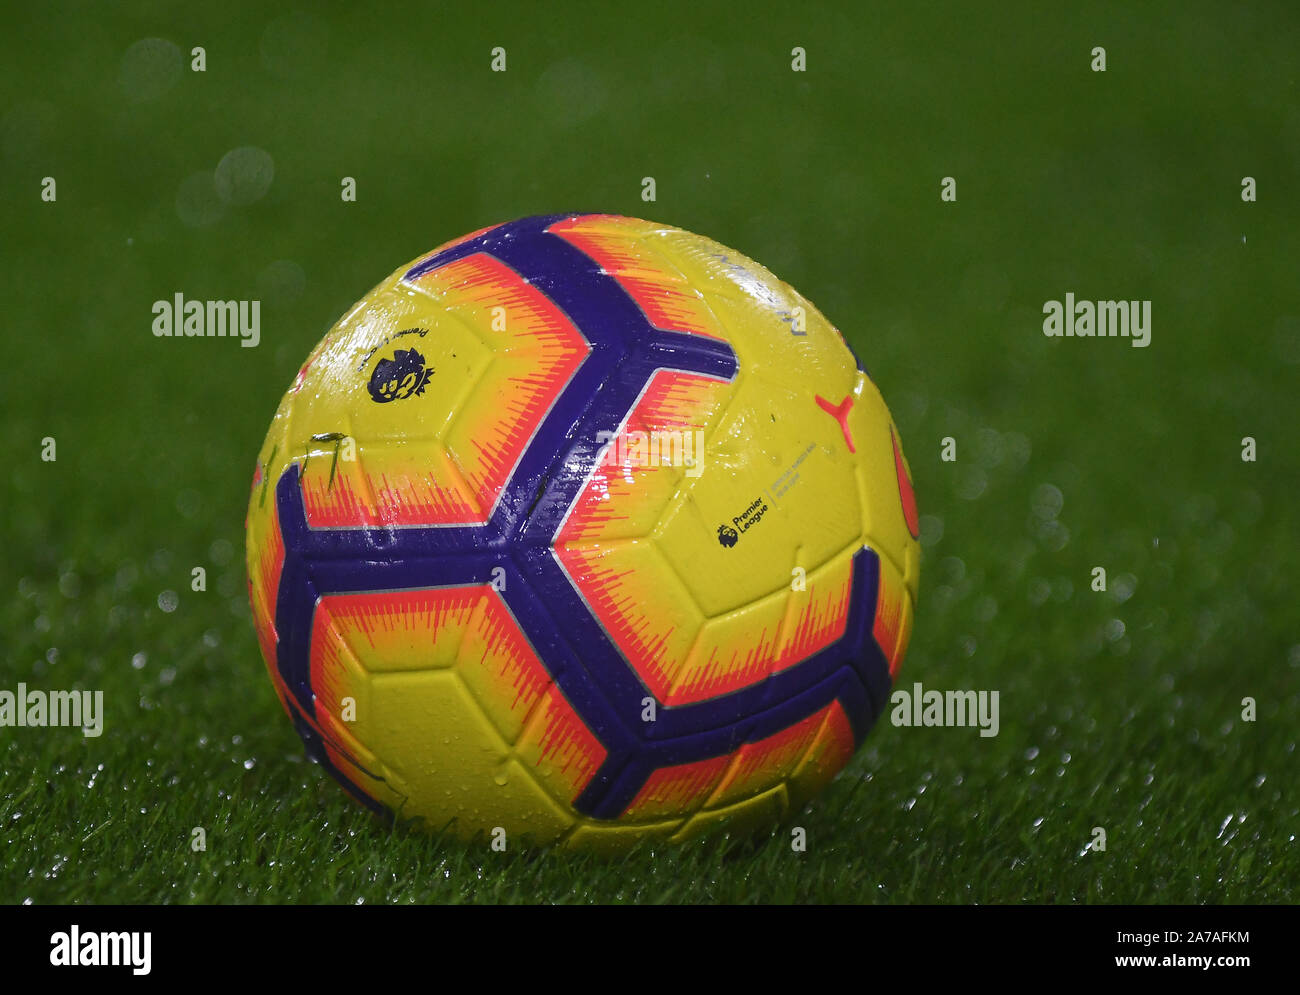 LONDON, ENGLAND - DECEMBER 15, 2018: The official Premier League match ball pictured prior to the 2018/19 Premier League game between Fulham FC and West Ham United at Craven Cottage. Stock Photo